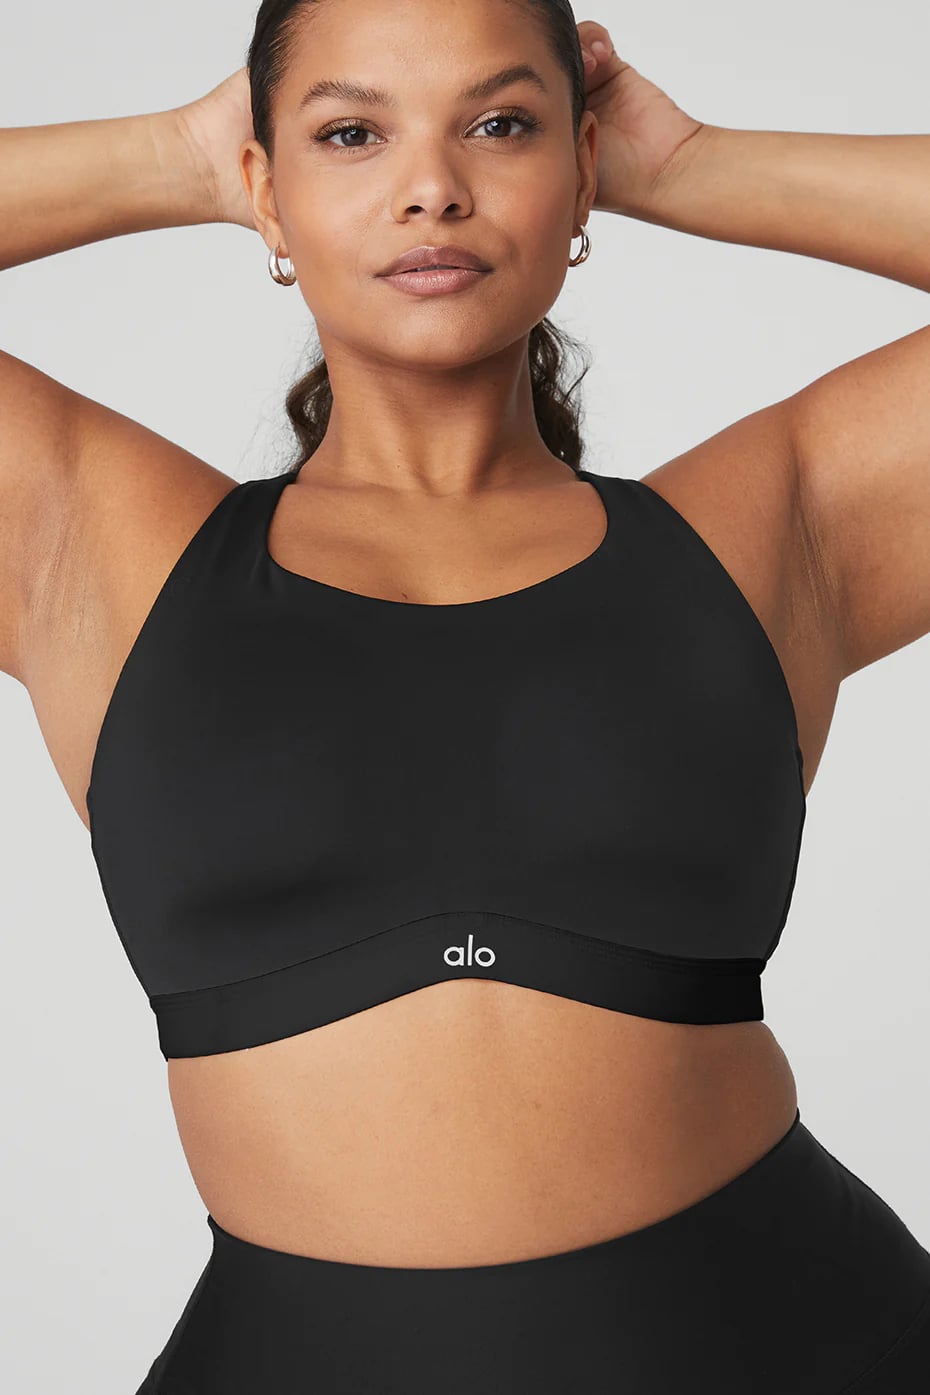 Alo Yoga is having its first big sale! These are the top 10 styles to buy  before they sell out